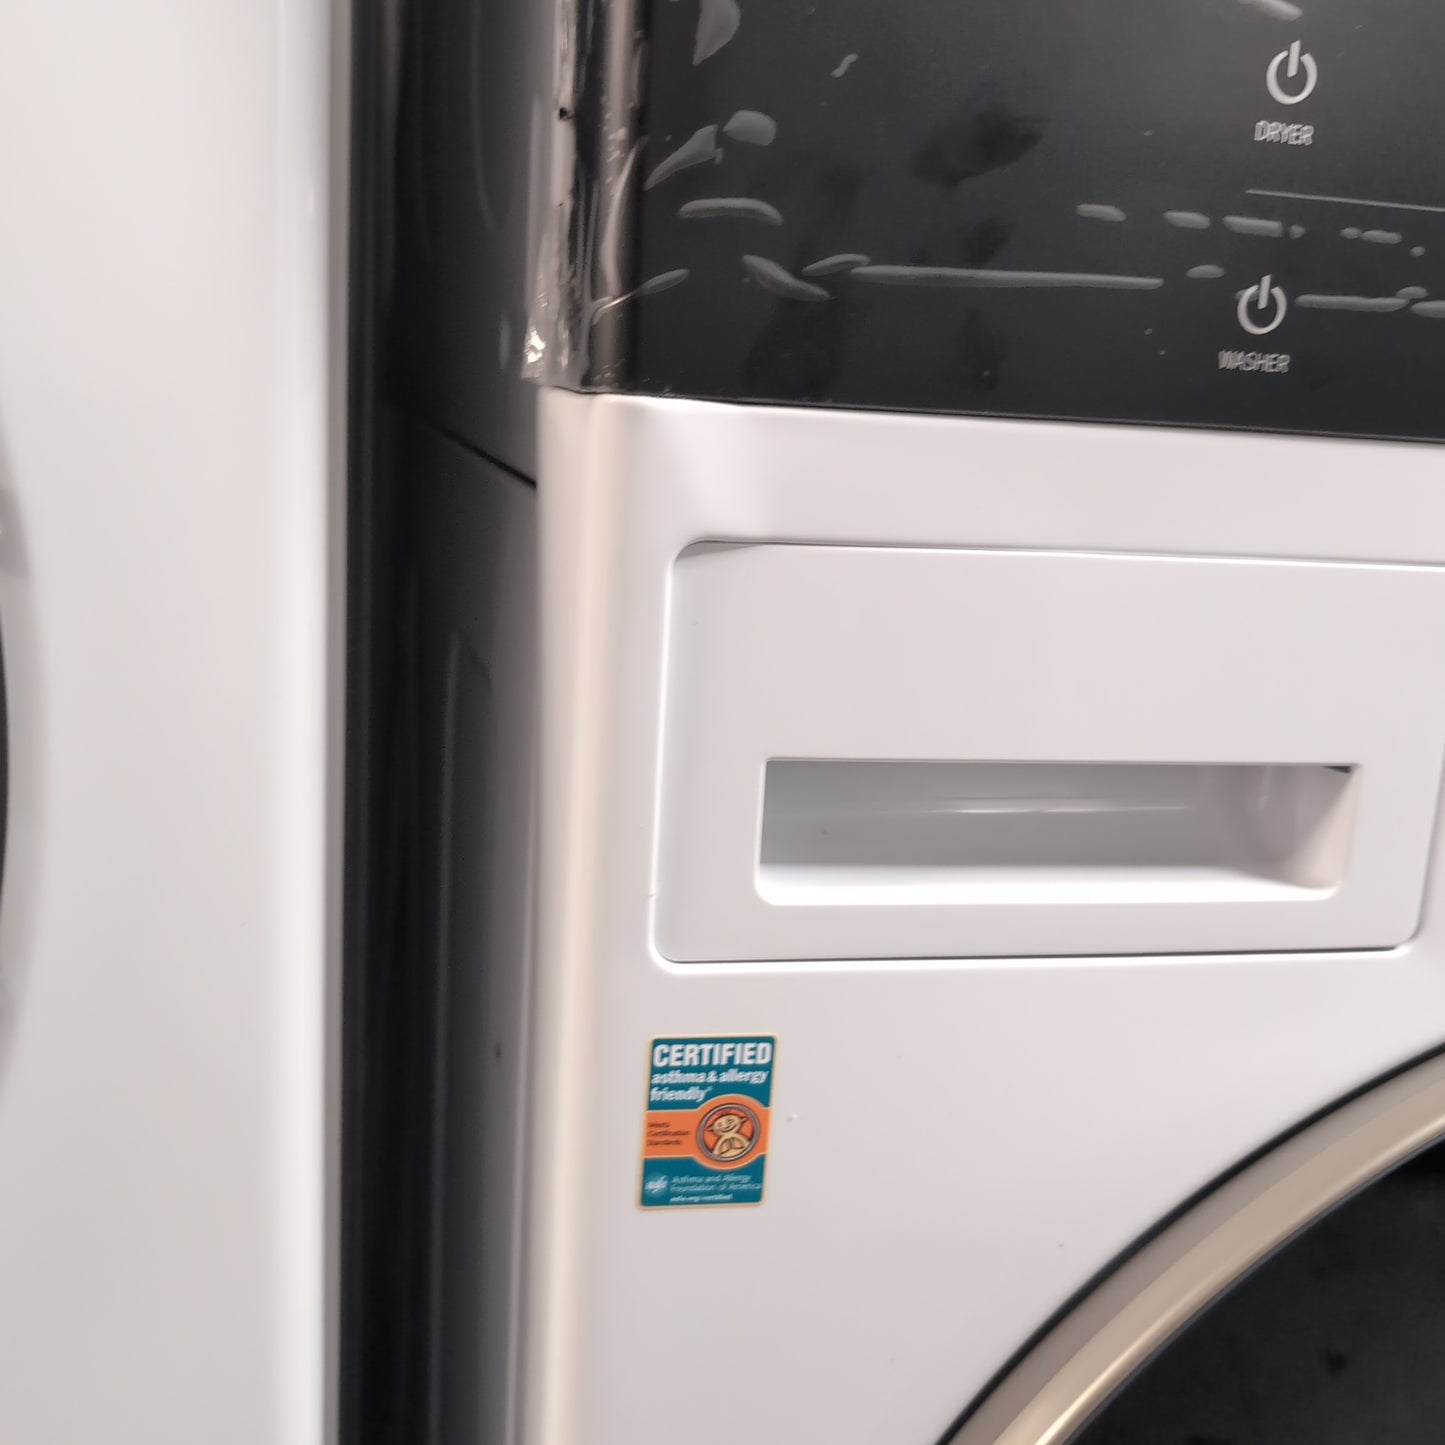 New LG
WashTower Stacked SMART Laundry Center 4.5 Cu.Ft. Front Load Washer & 7.4 Cu.Ft. Electric Dryer in White w/ Steam. Cosmetic Damage